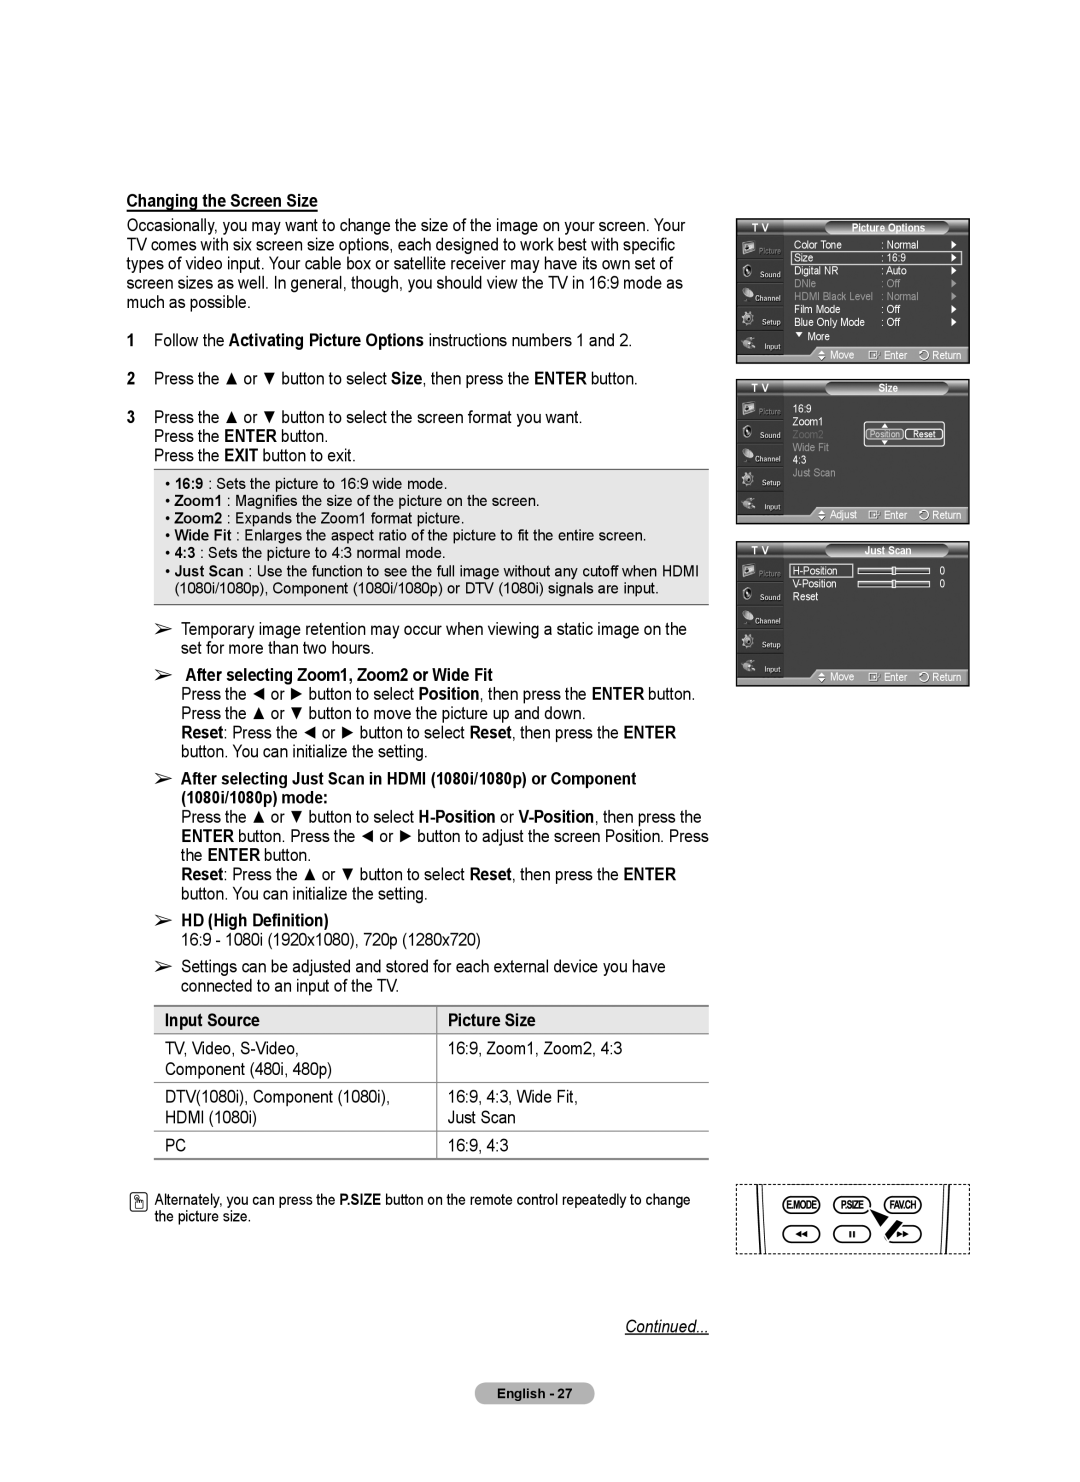 Samsung 460 user manual Changing the Screen Size, HD High Definition, Input Source, Picture Size, Continued 